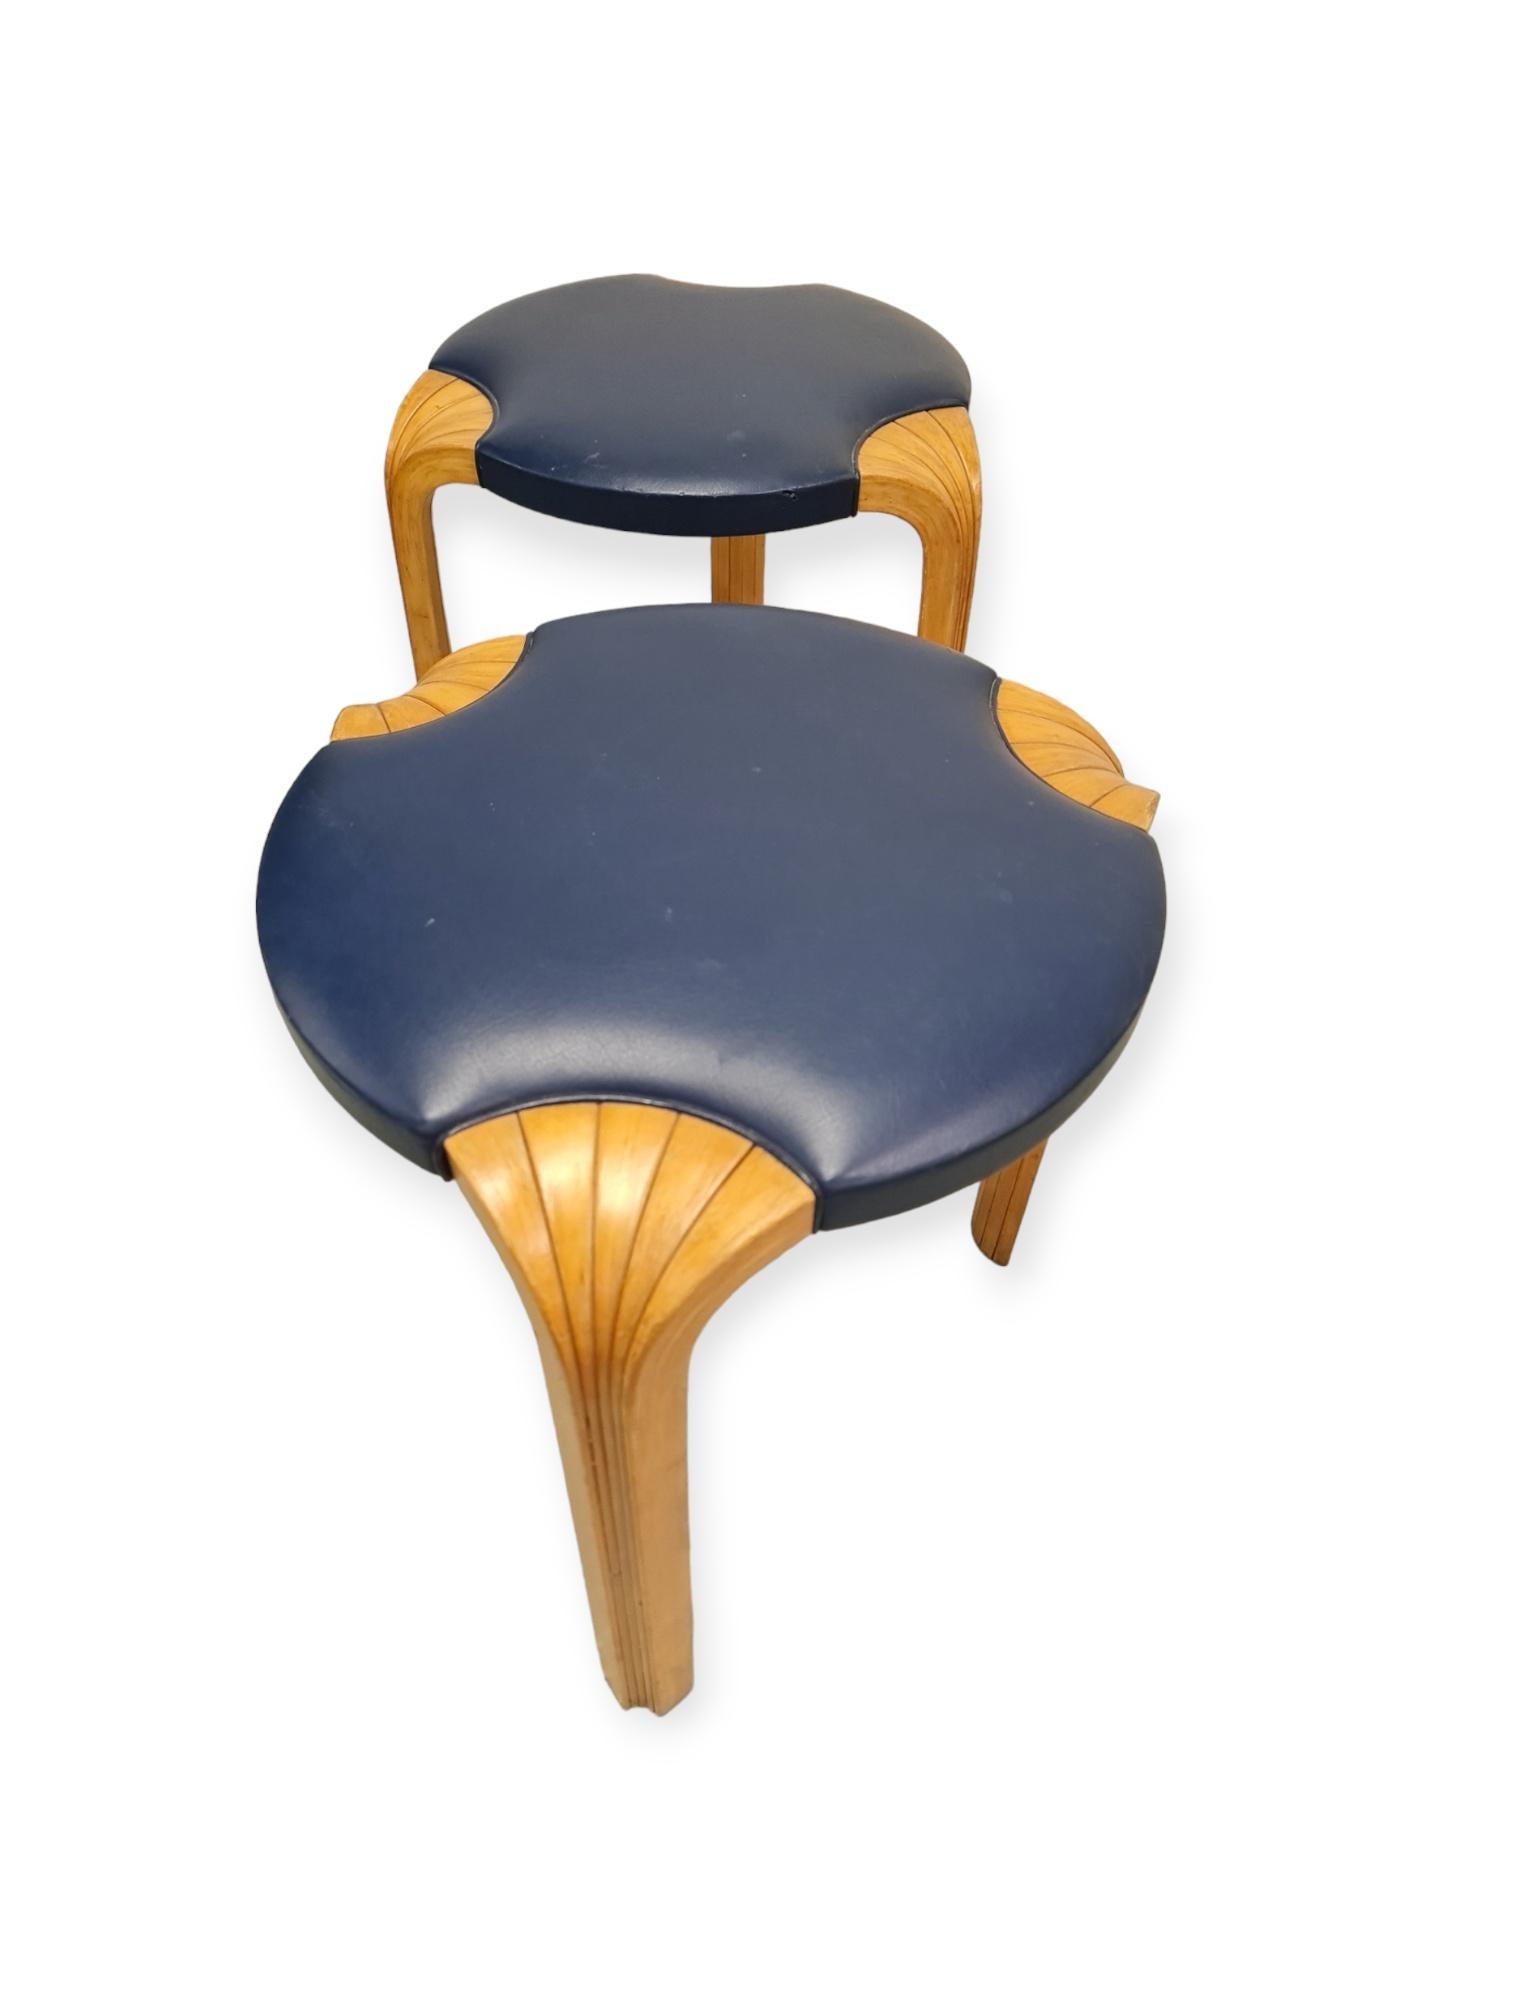 These simple yet elegant stools are of very high quality manufacturing with great attention to detail. The less common x-leg with the original blue leather padding bring plain beauty. The blue color we think is because of the 1952 olympics that were